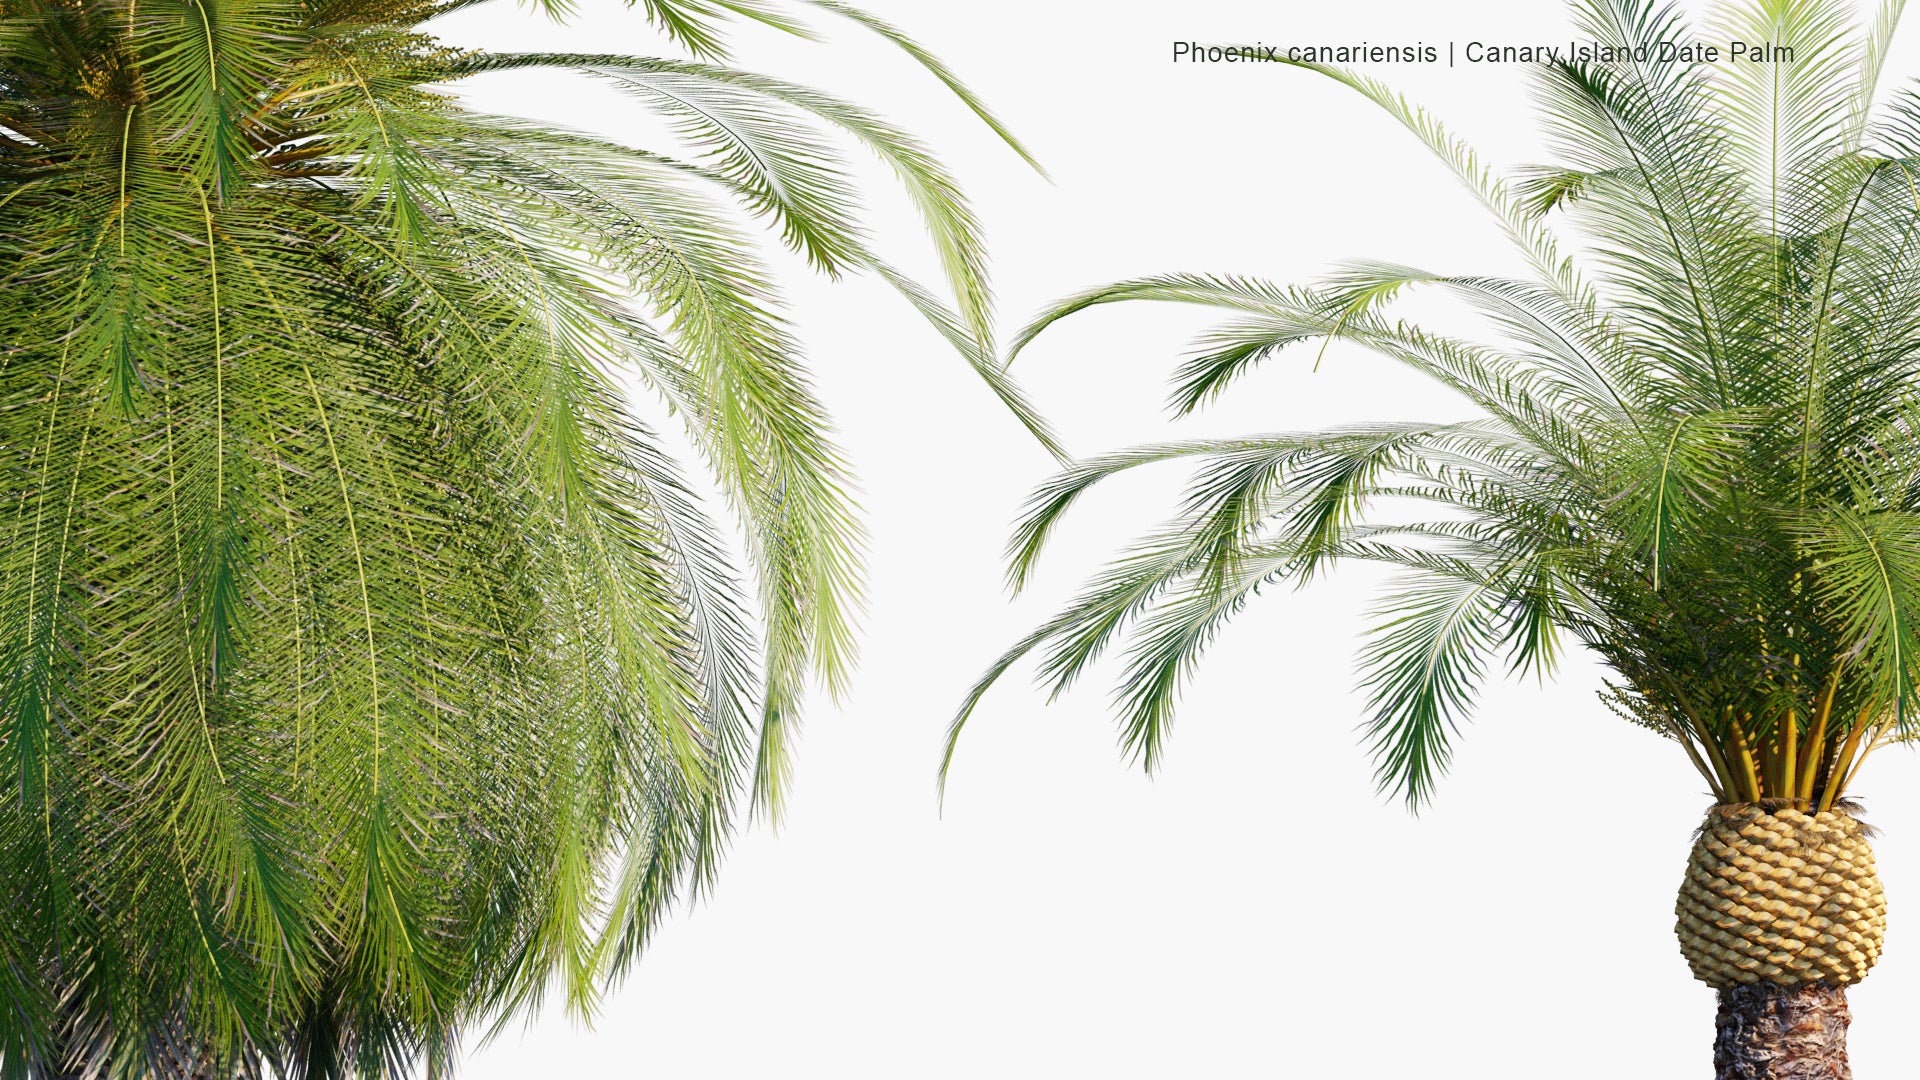 Low Poly Phoenix Canariensis - Canary Island Date Palm, Pineapple Palm (3D Model)